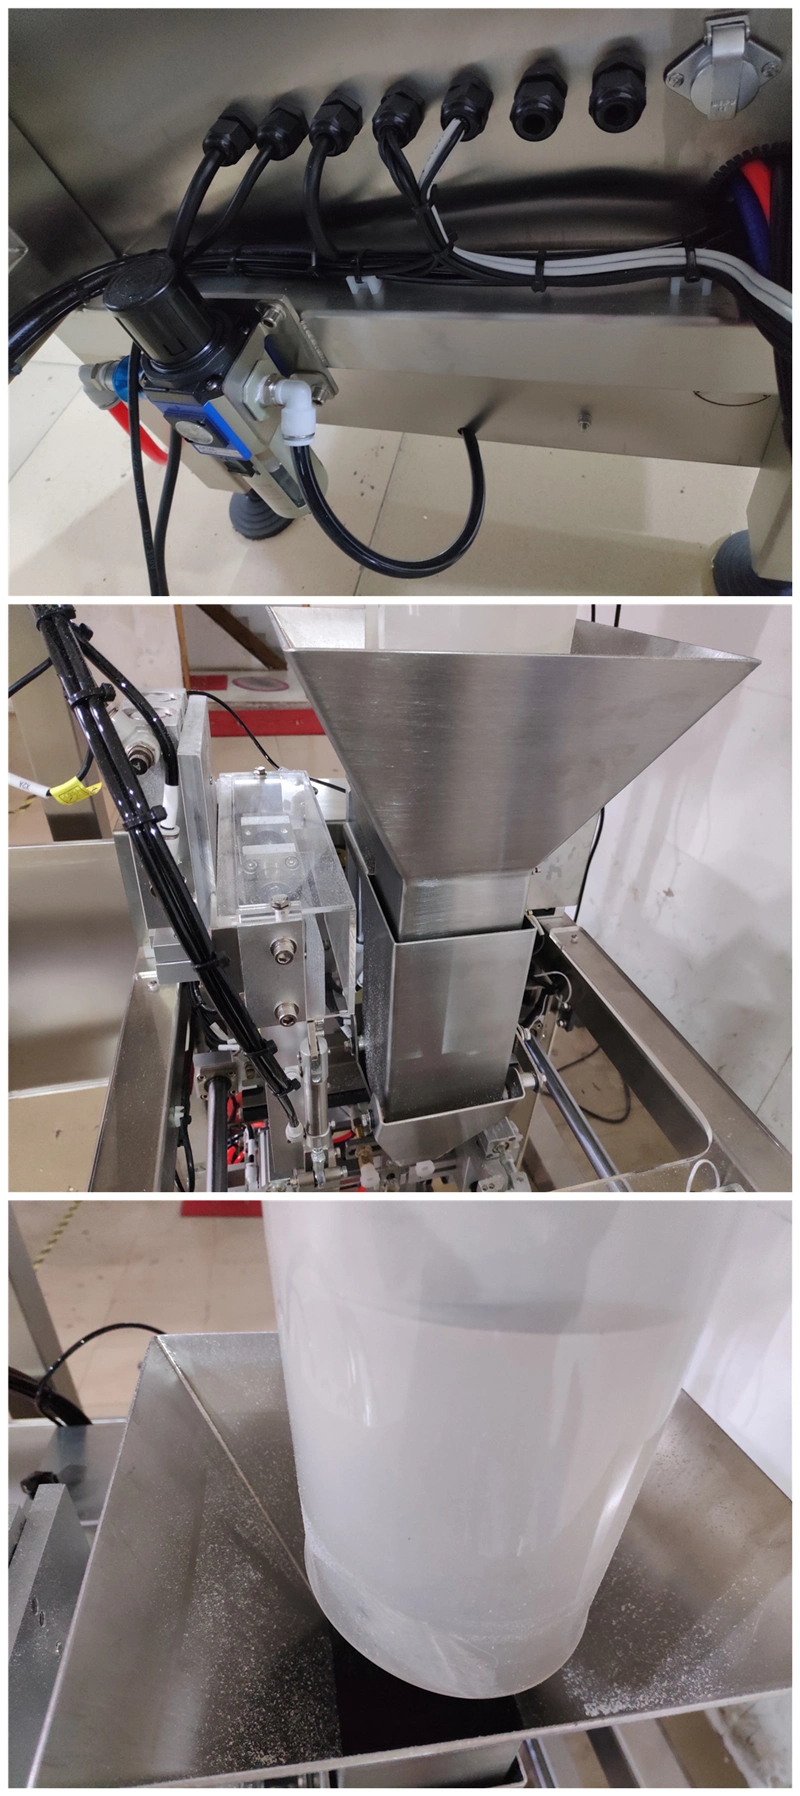 Automatic Rotary Pre-Made Pouch Open Filling Sealing Machine